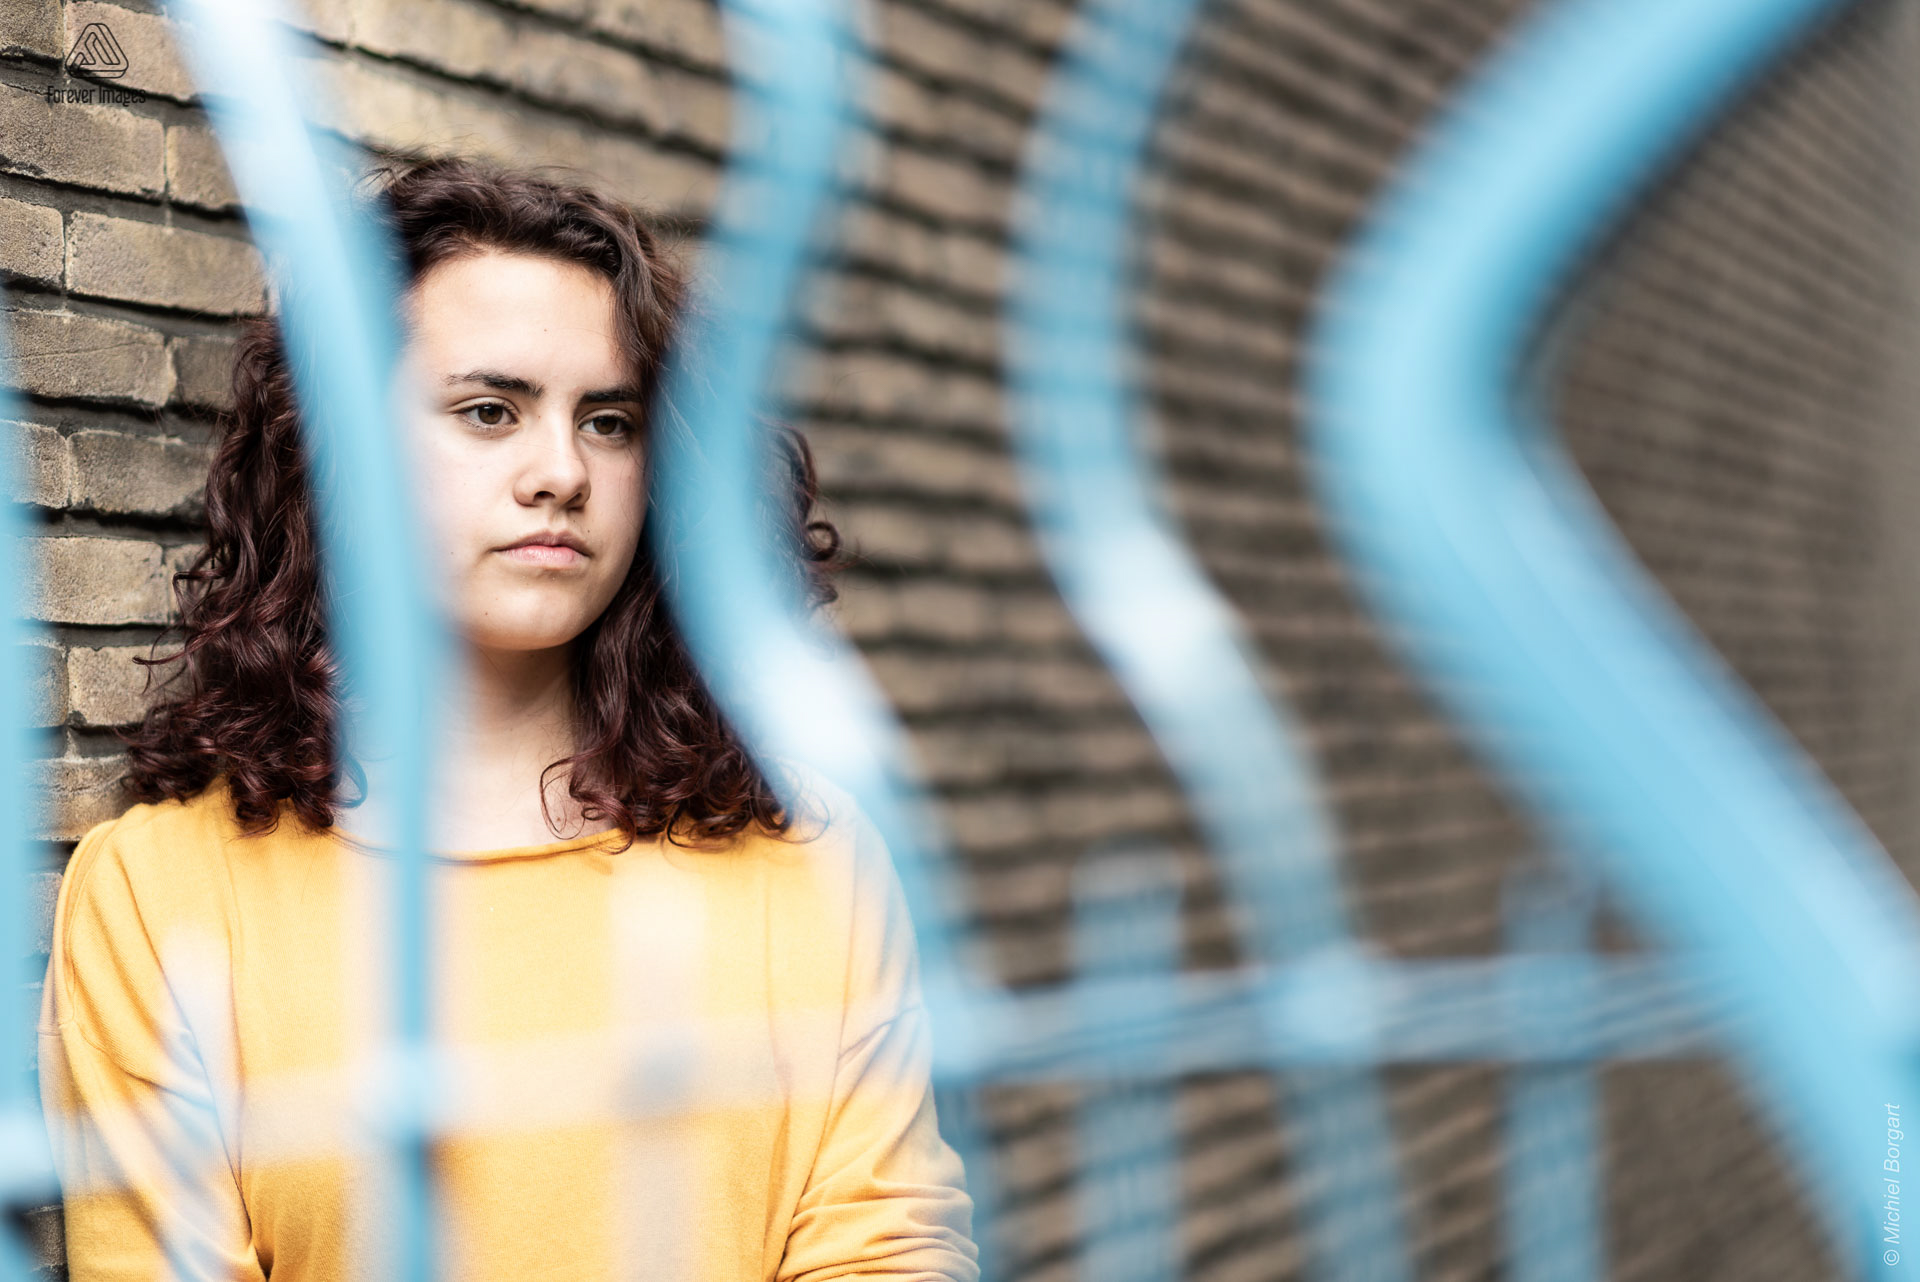 Portrait photo young lady against wall behind blue fence looking sideways | Tessa Holscher | Portrait Photographer Michiel Borgart - Forever Images.